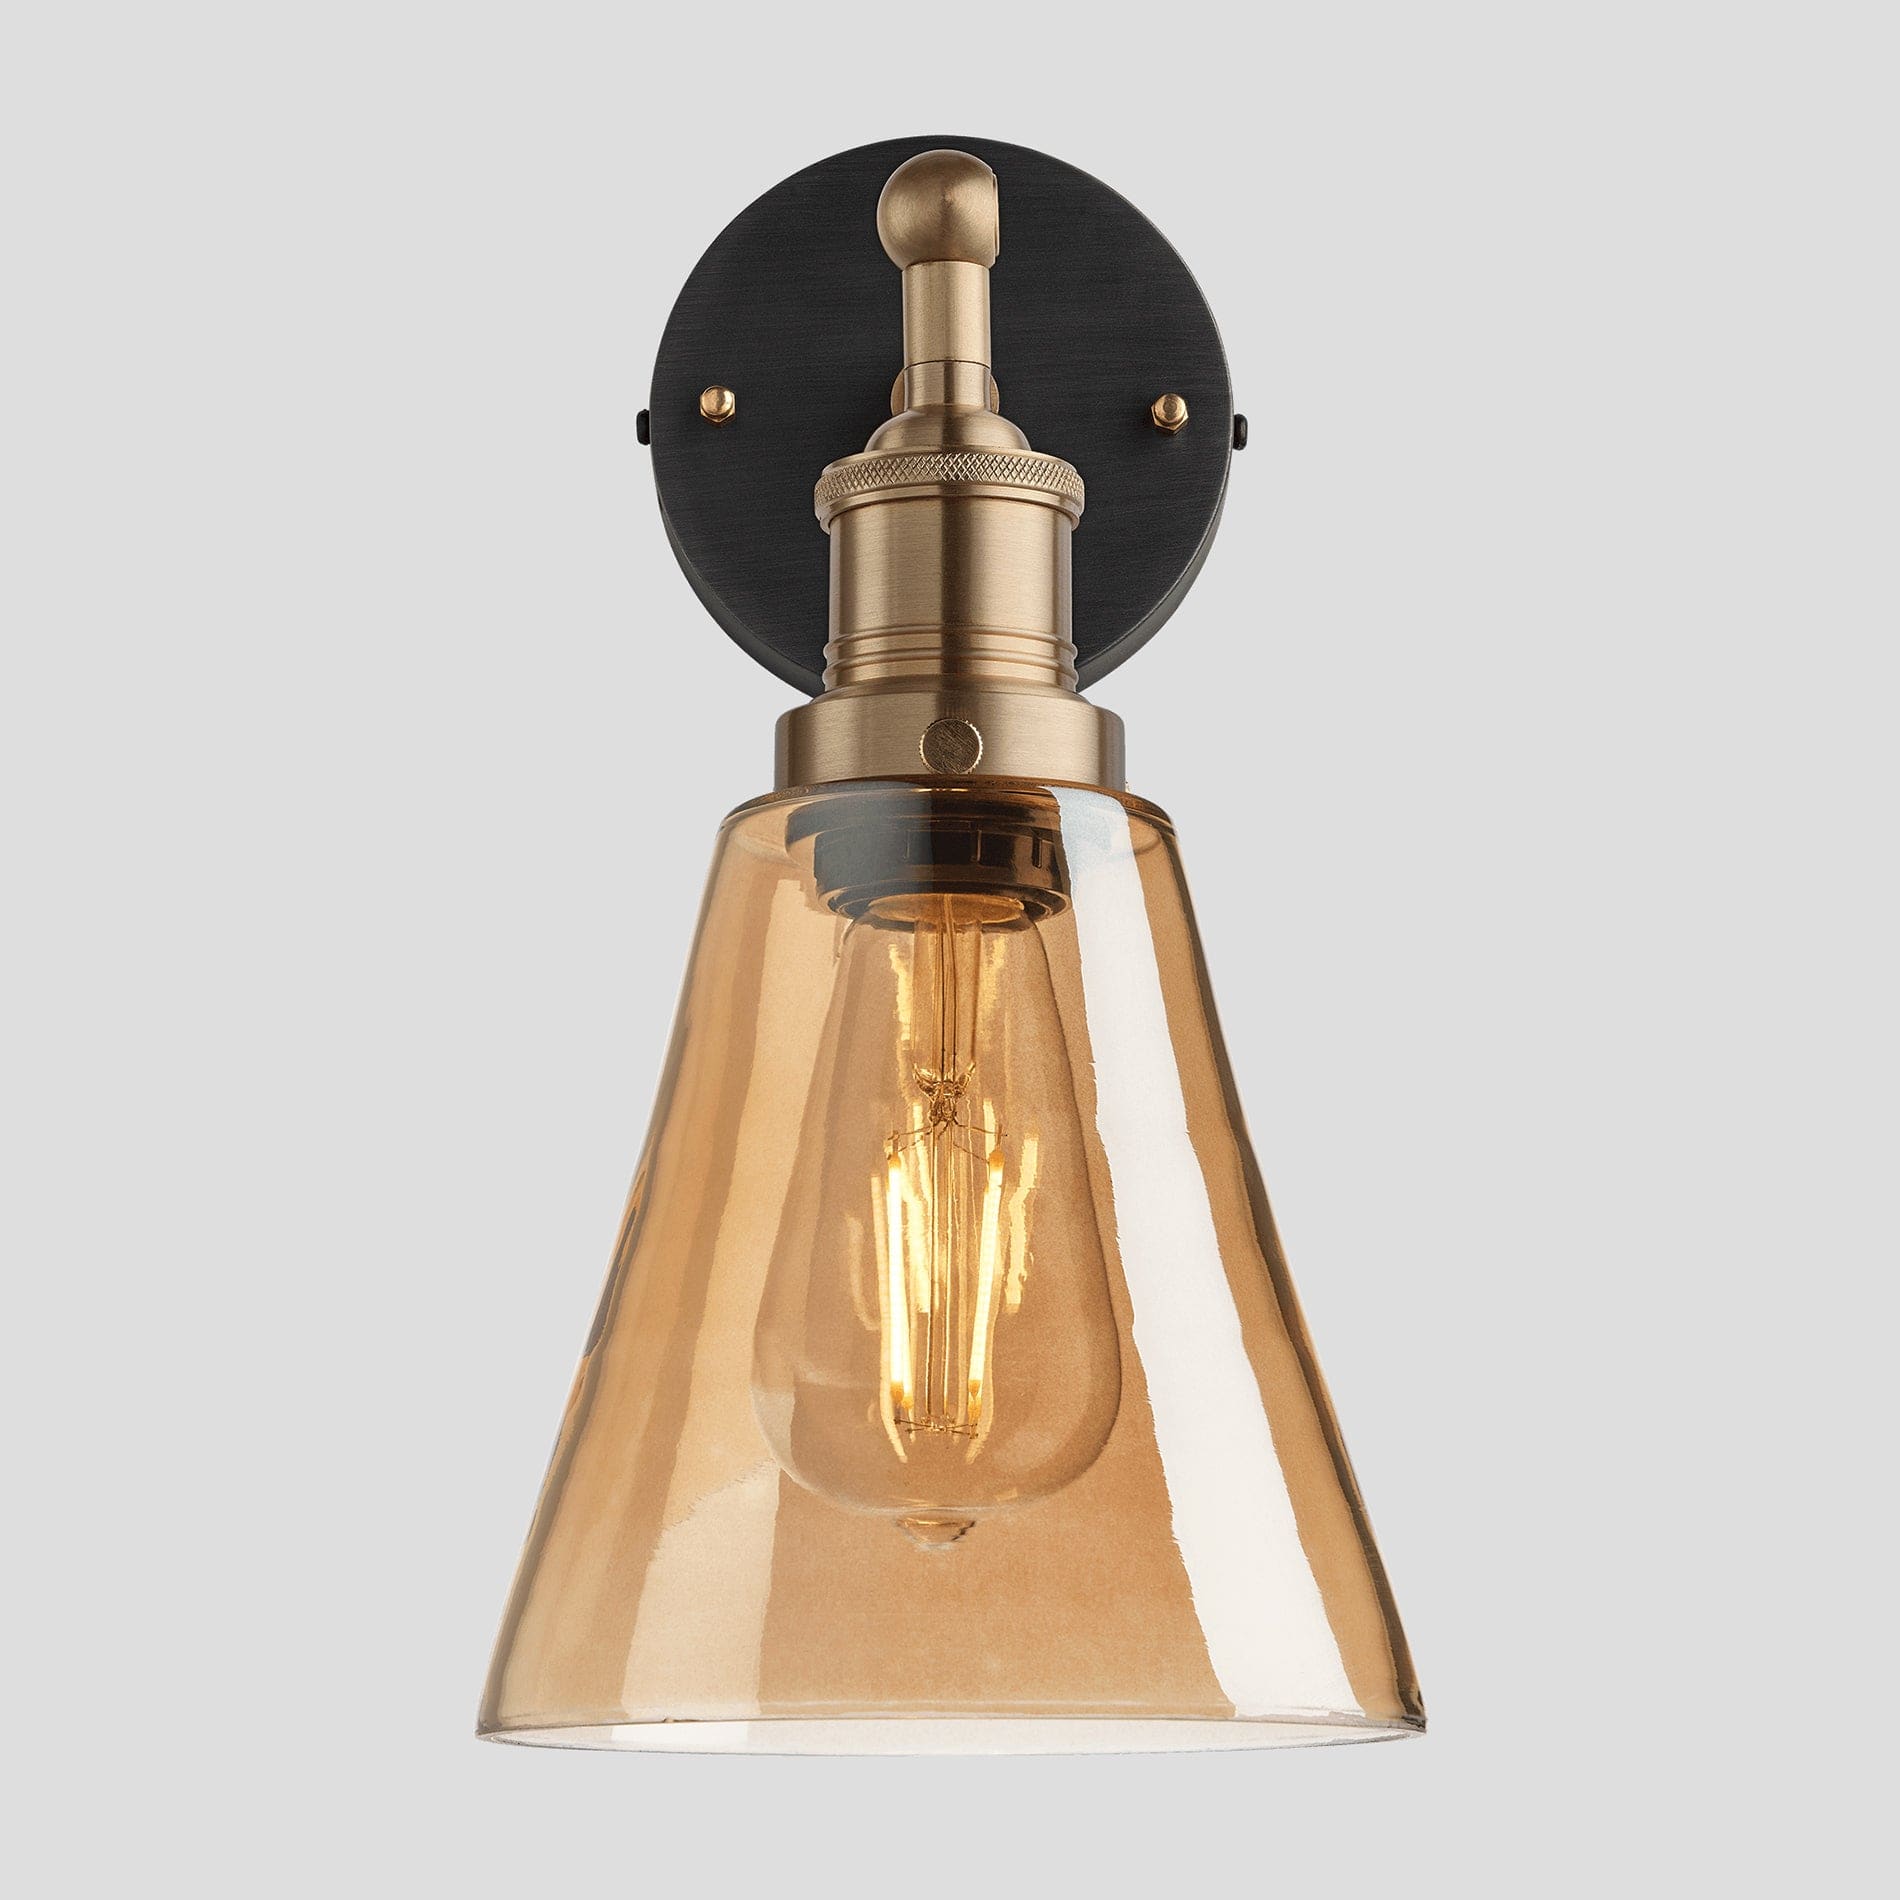 Brooklyn Tinted Glass Flask Wall Light - 6 Inch - Amber Industville